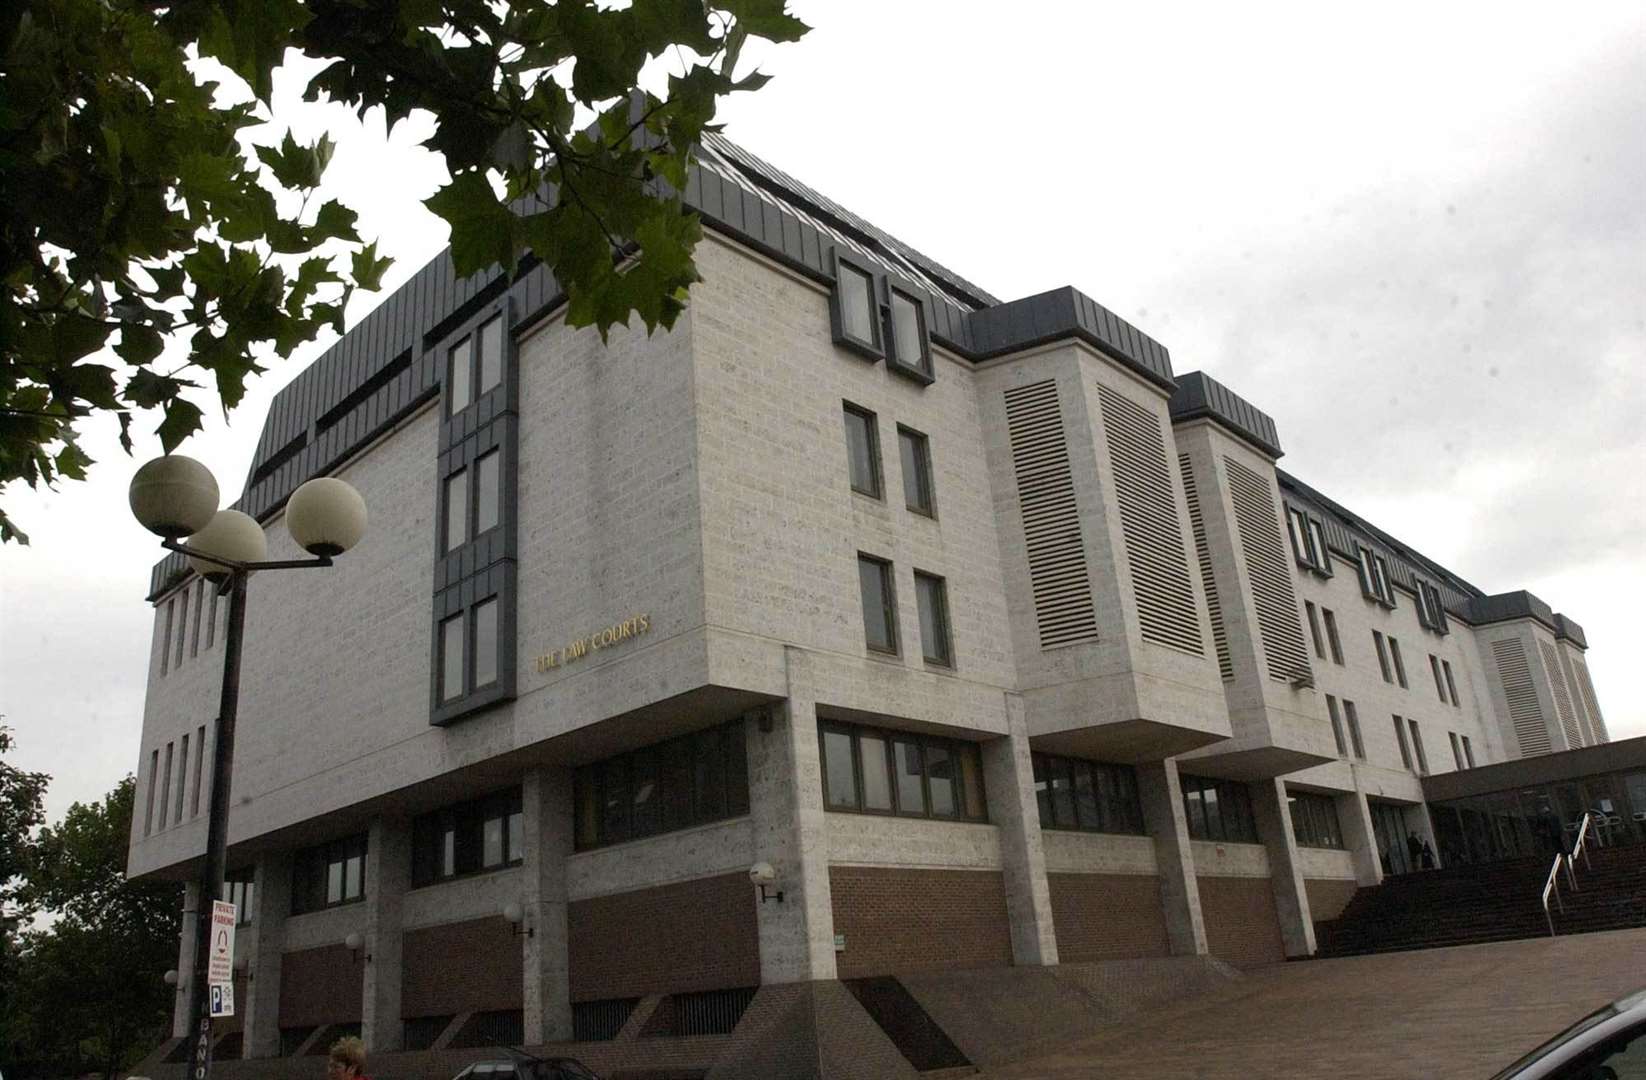 Lina Wang and Chung Fu Wang are due to appear at at Maidstone Crown Court (pictured) on September 17